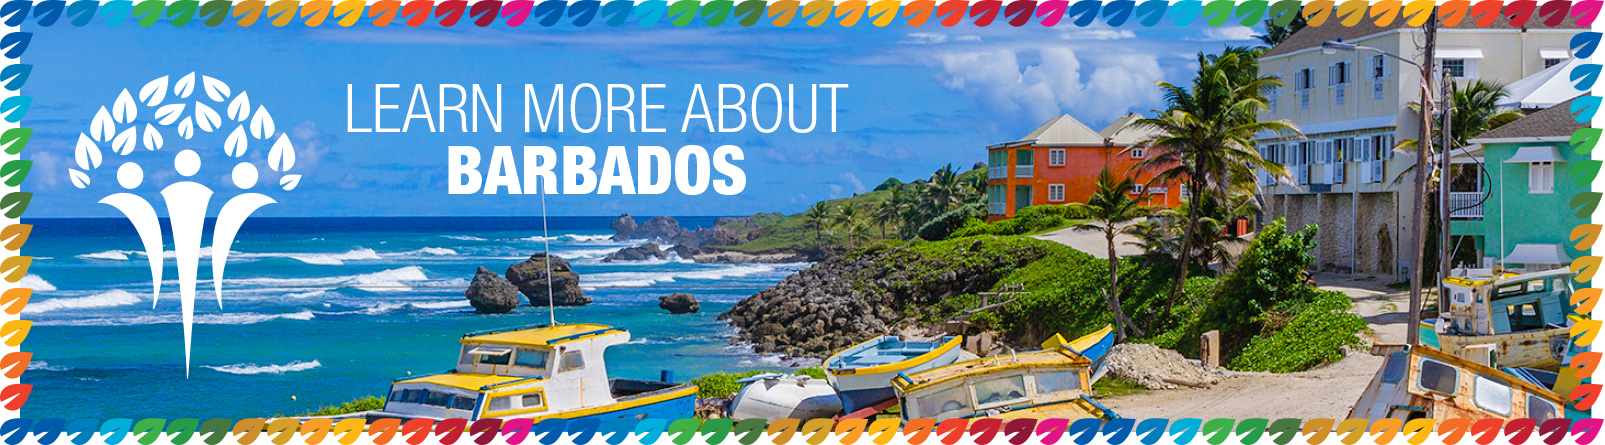 Learn more about Barbados